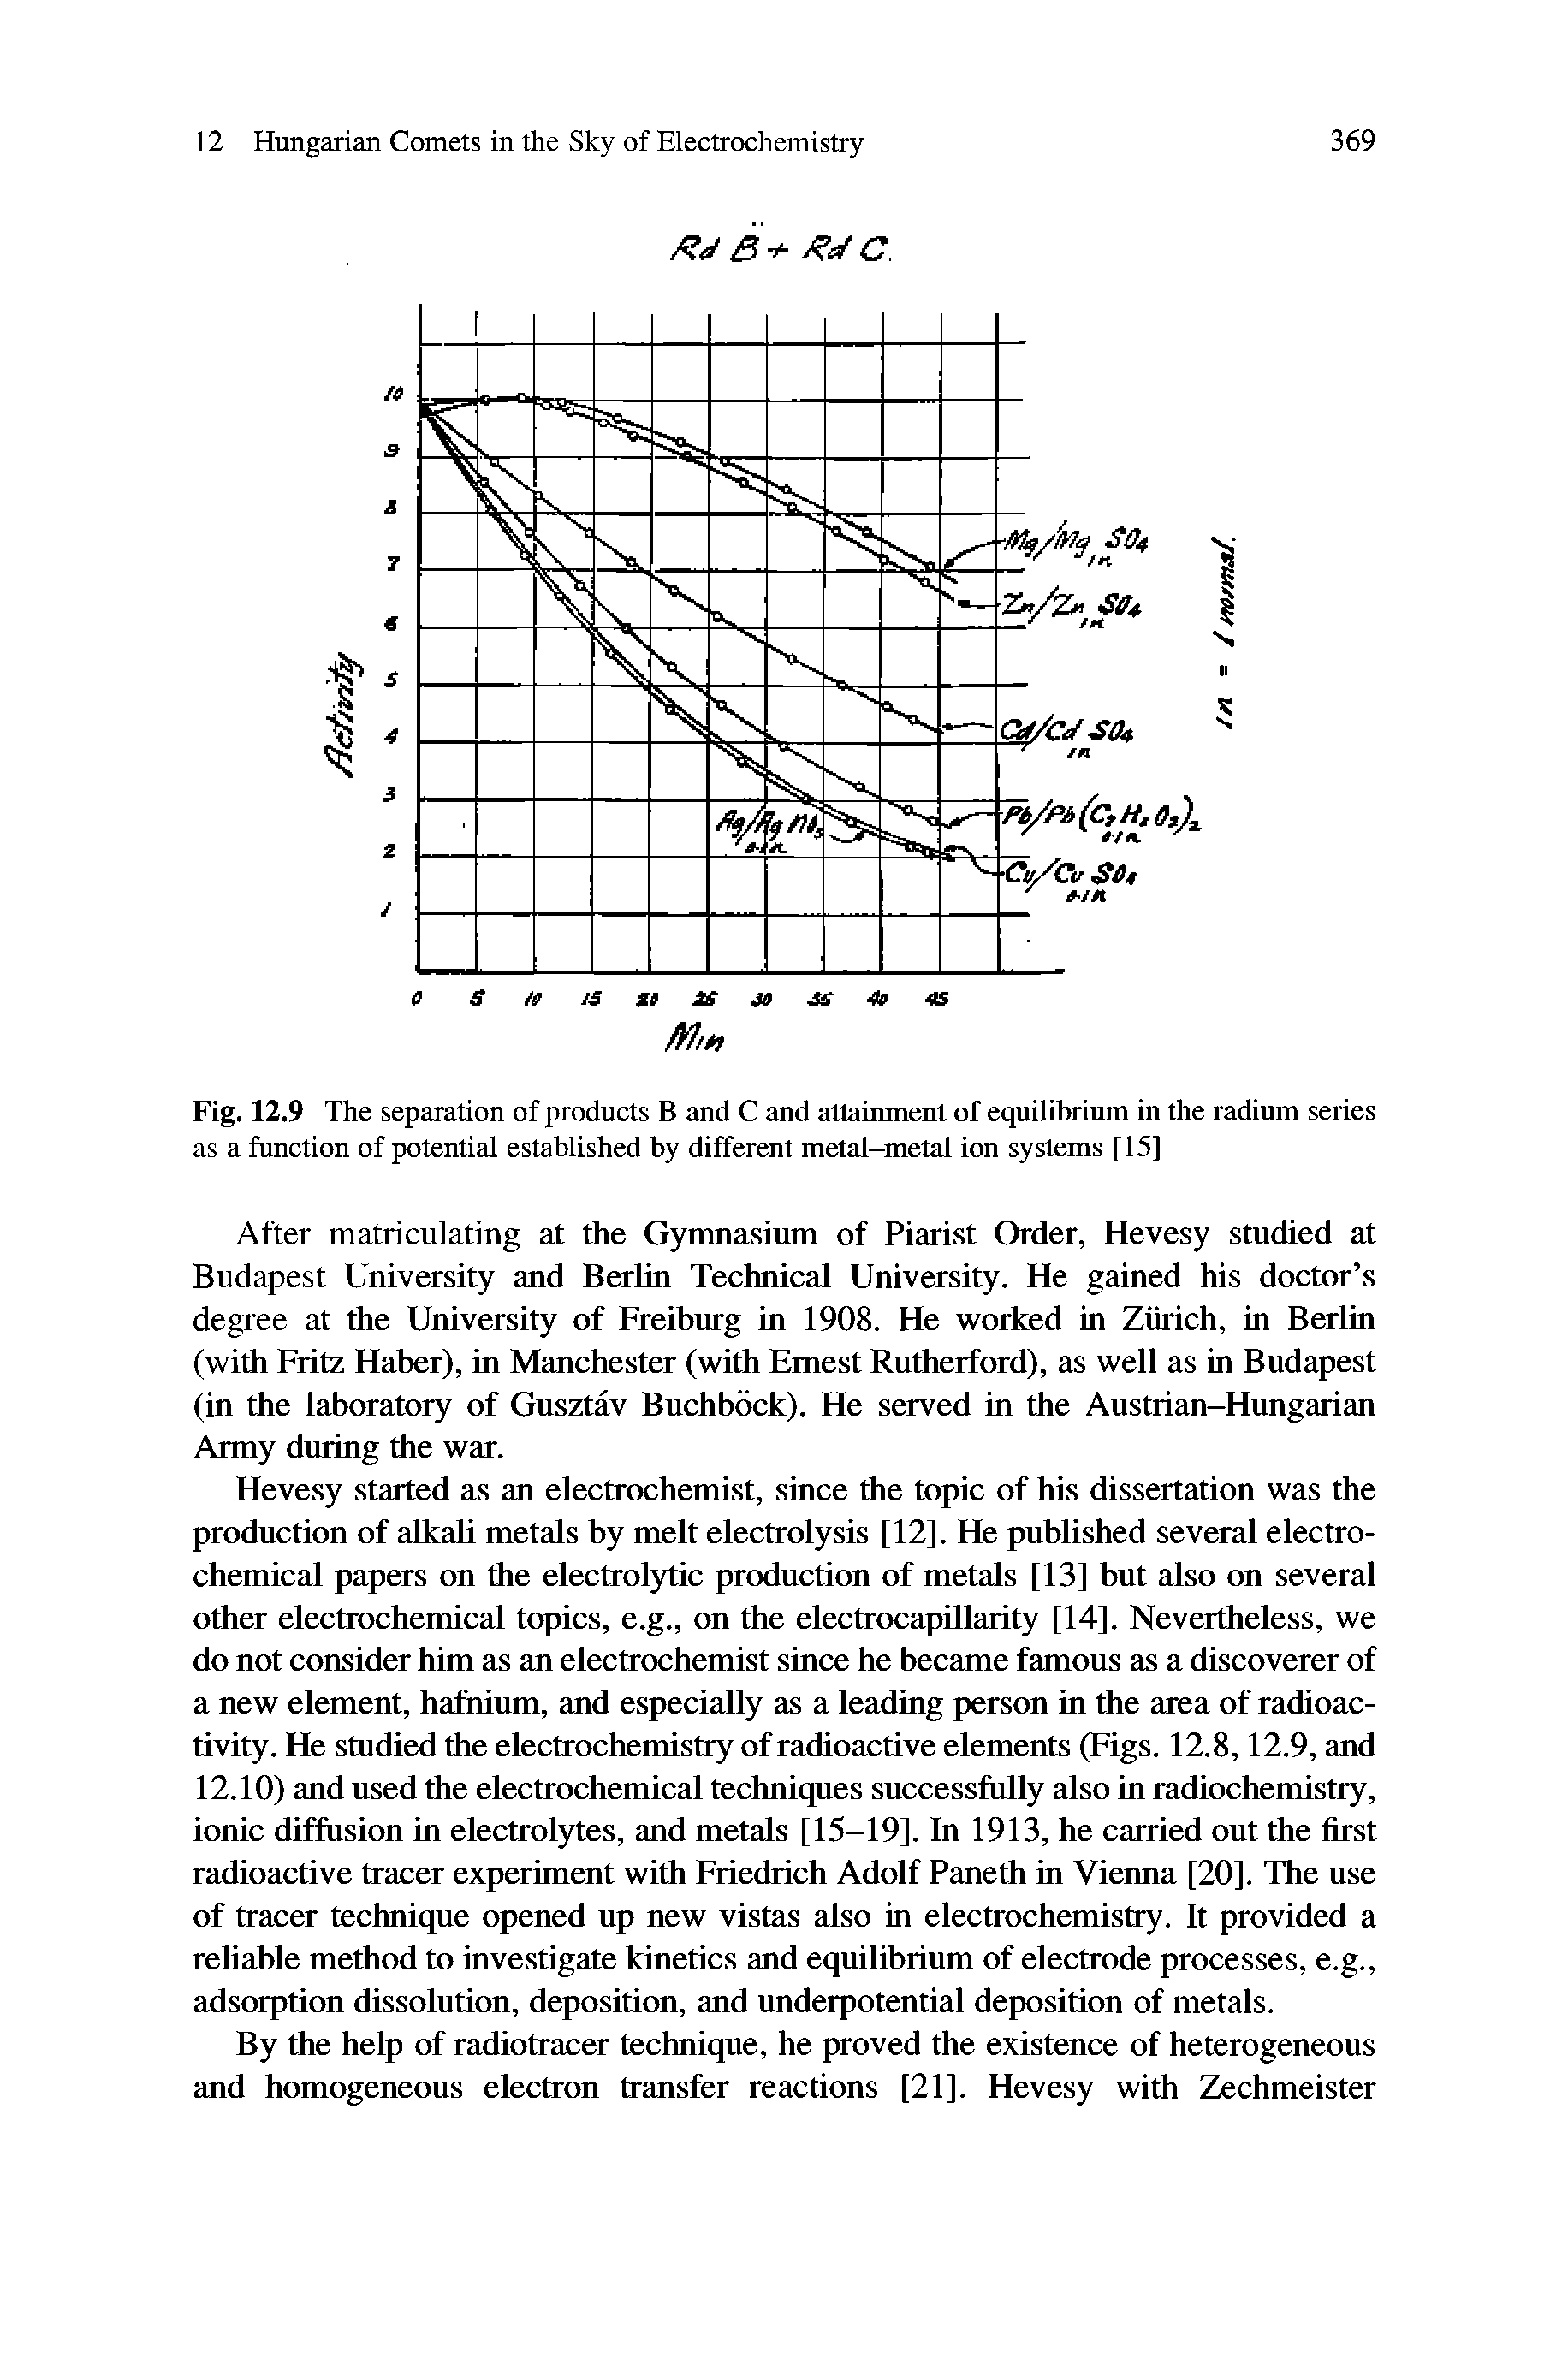 Fig. 12.9 The separation of products B and C and attainment of equilibrium in the radium series as a function of potential established by different metal-metal ion systems [15]...